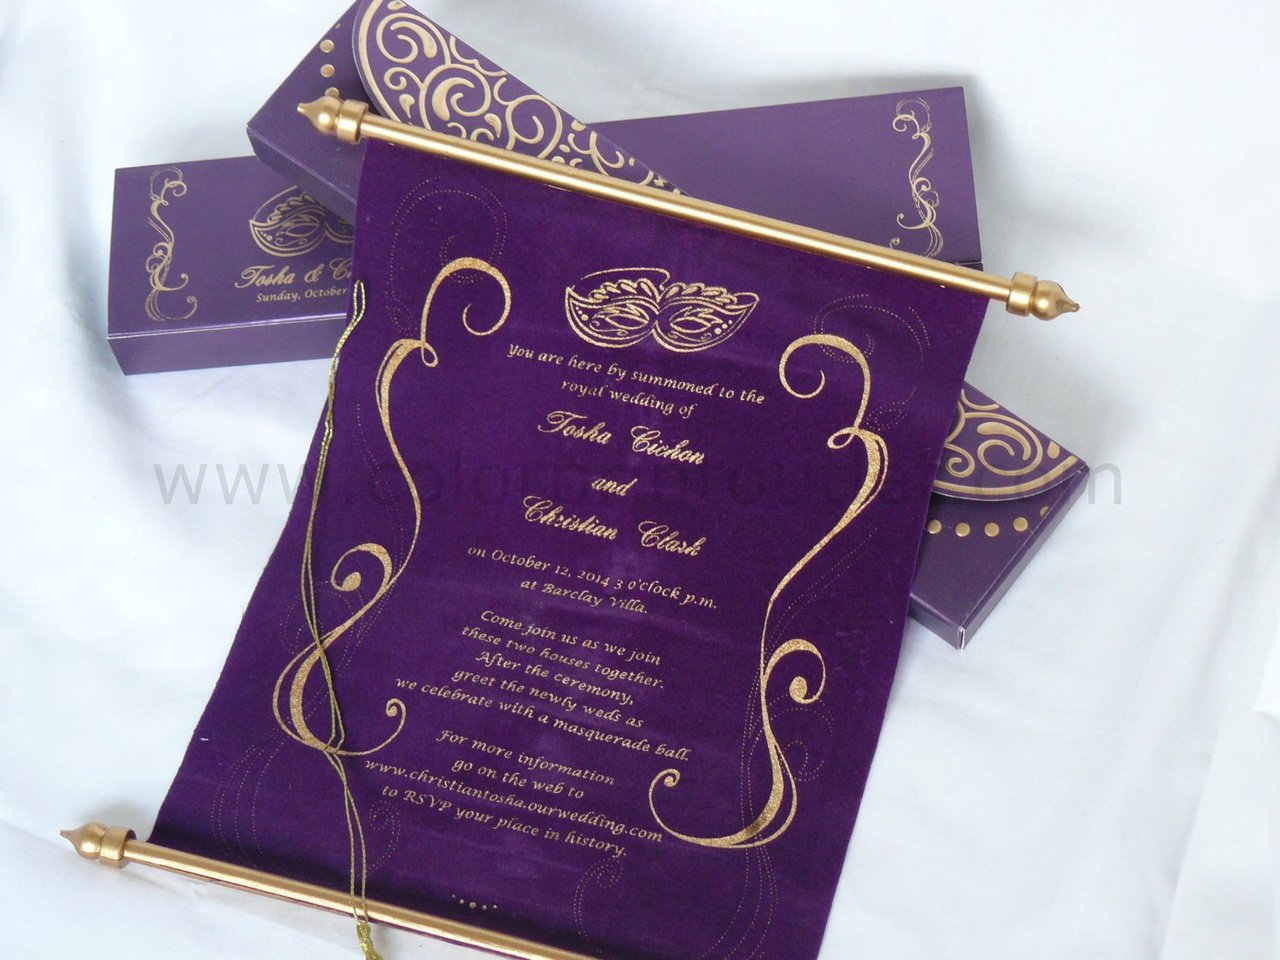 1000+ Ideas About Masquerade Party Invitations On Pinterest